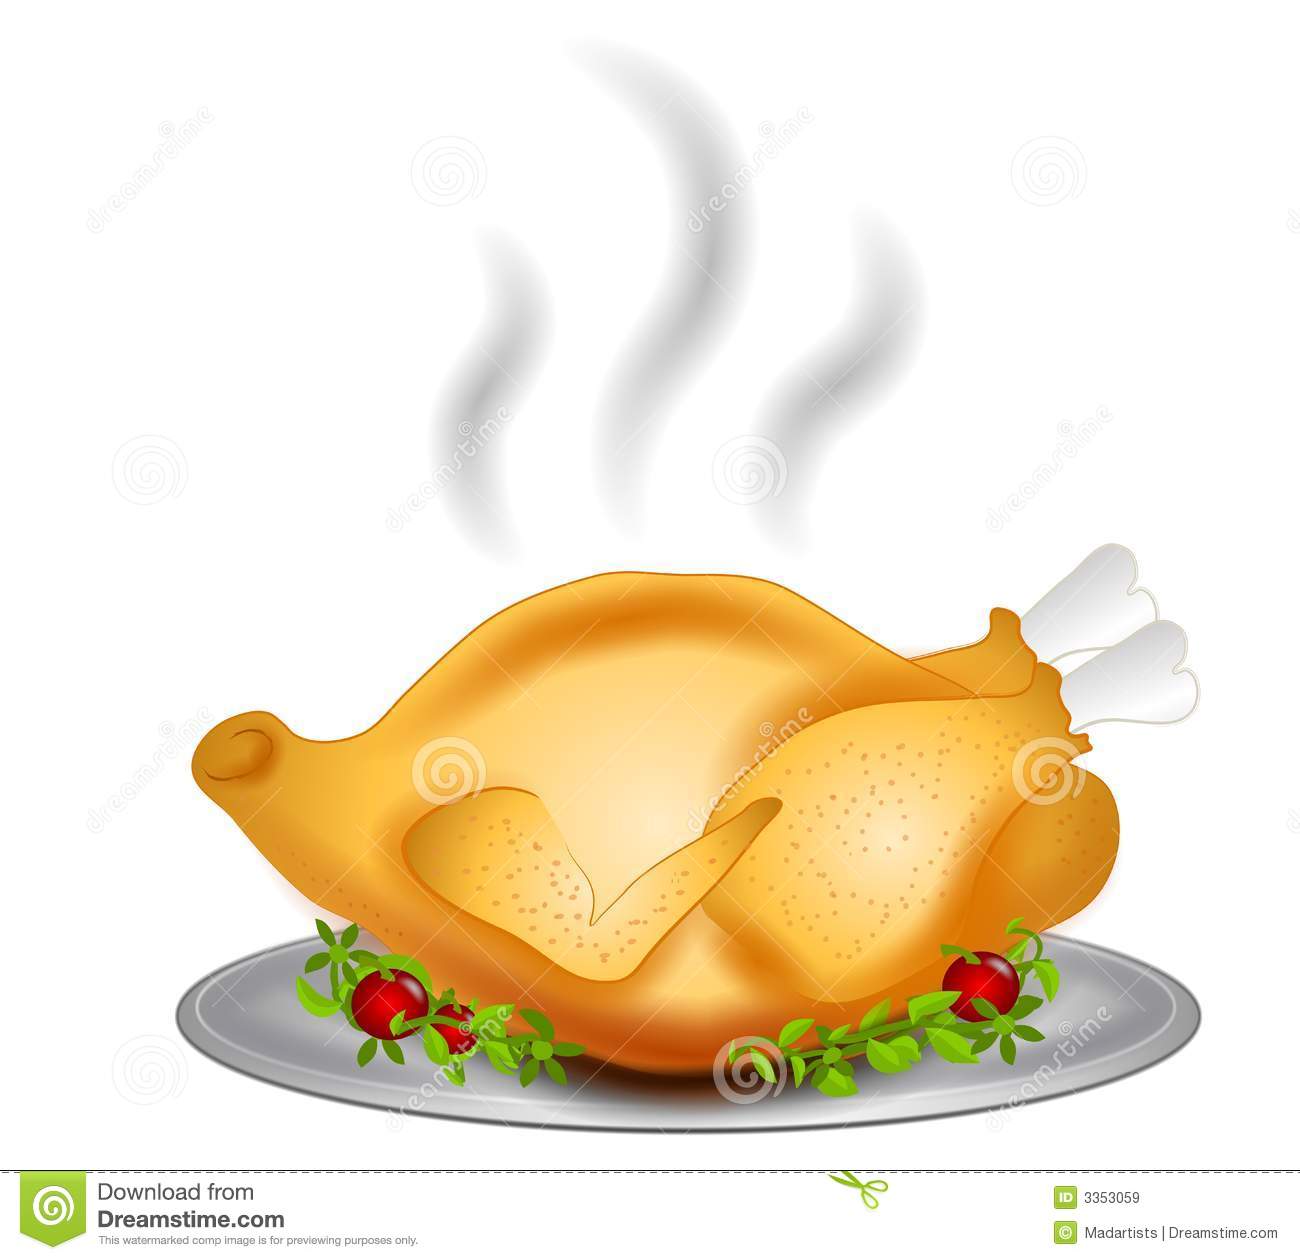 Clip Art Illustration Of A Cooked Turkey Set Upon A Decorative Tray